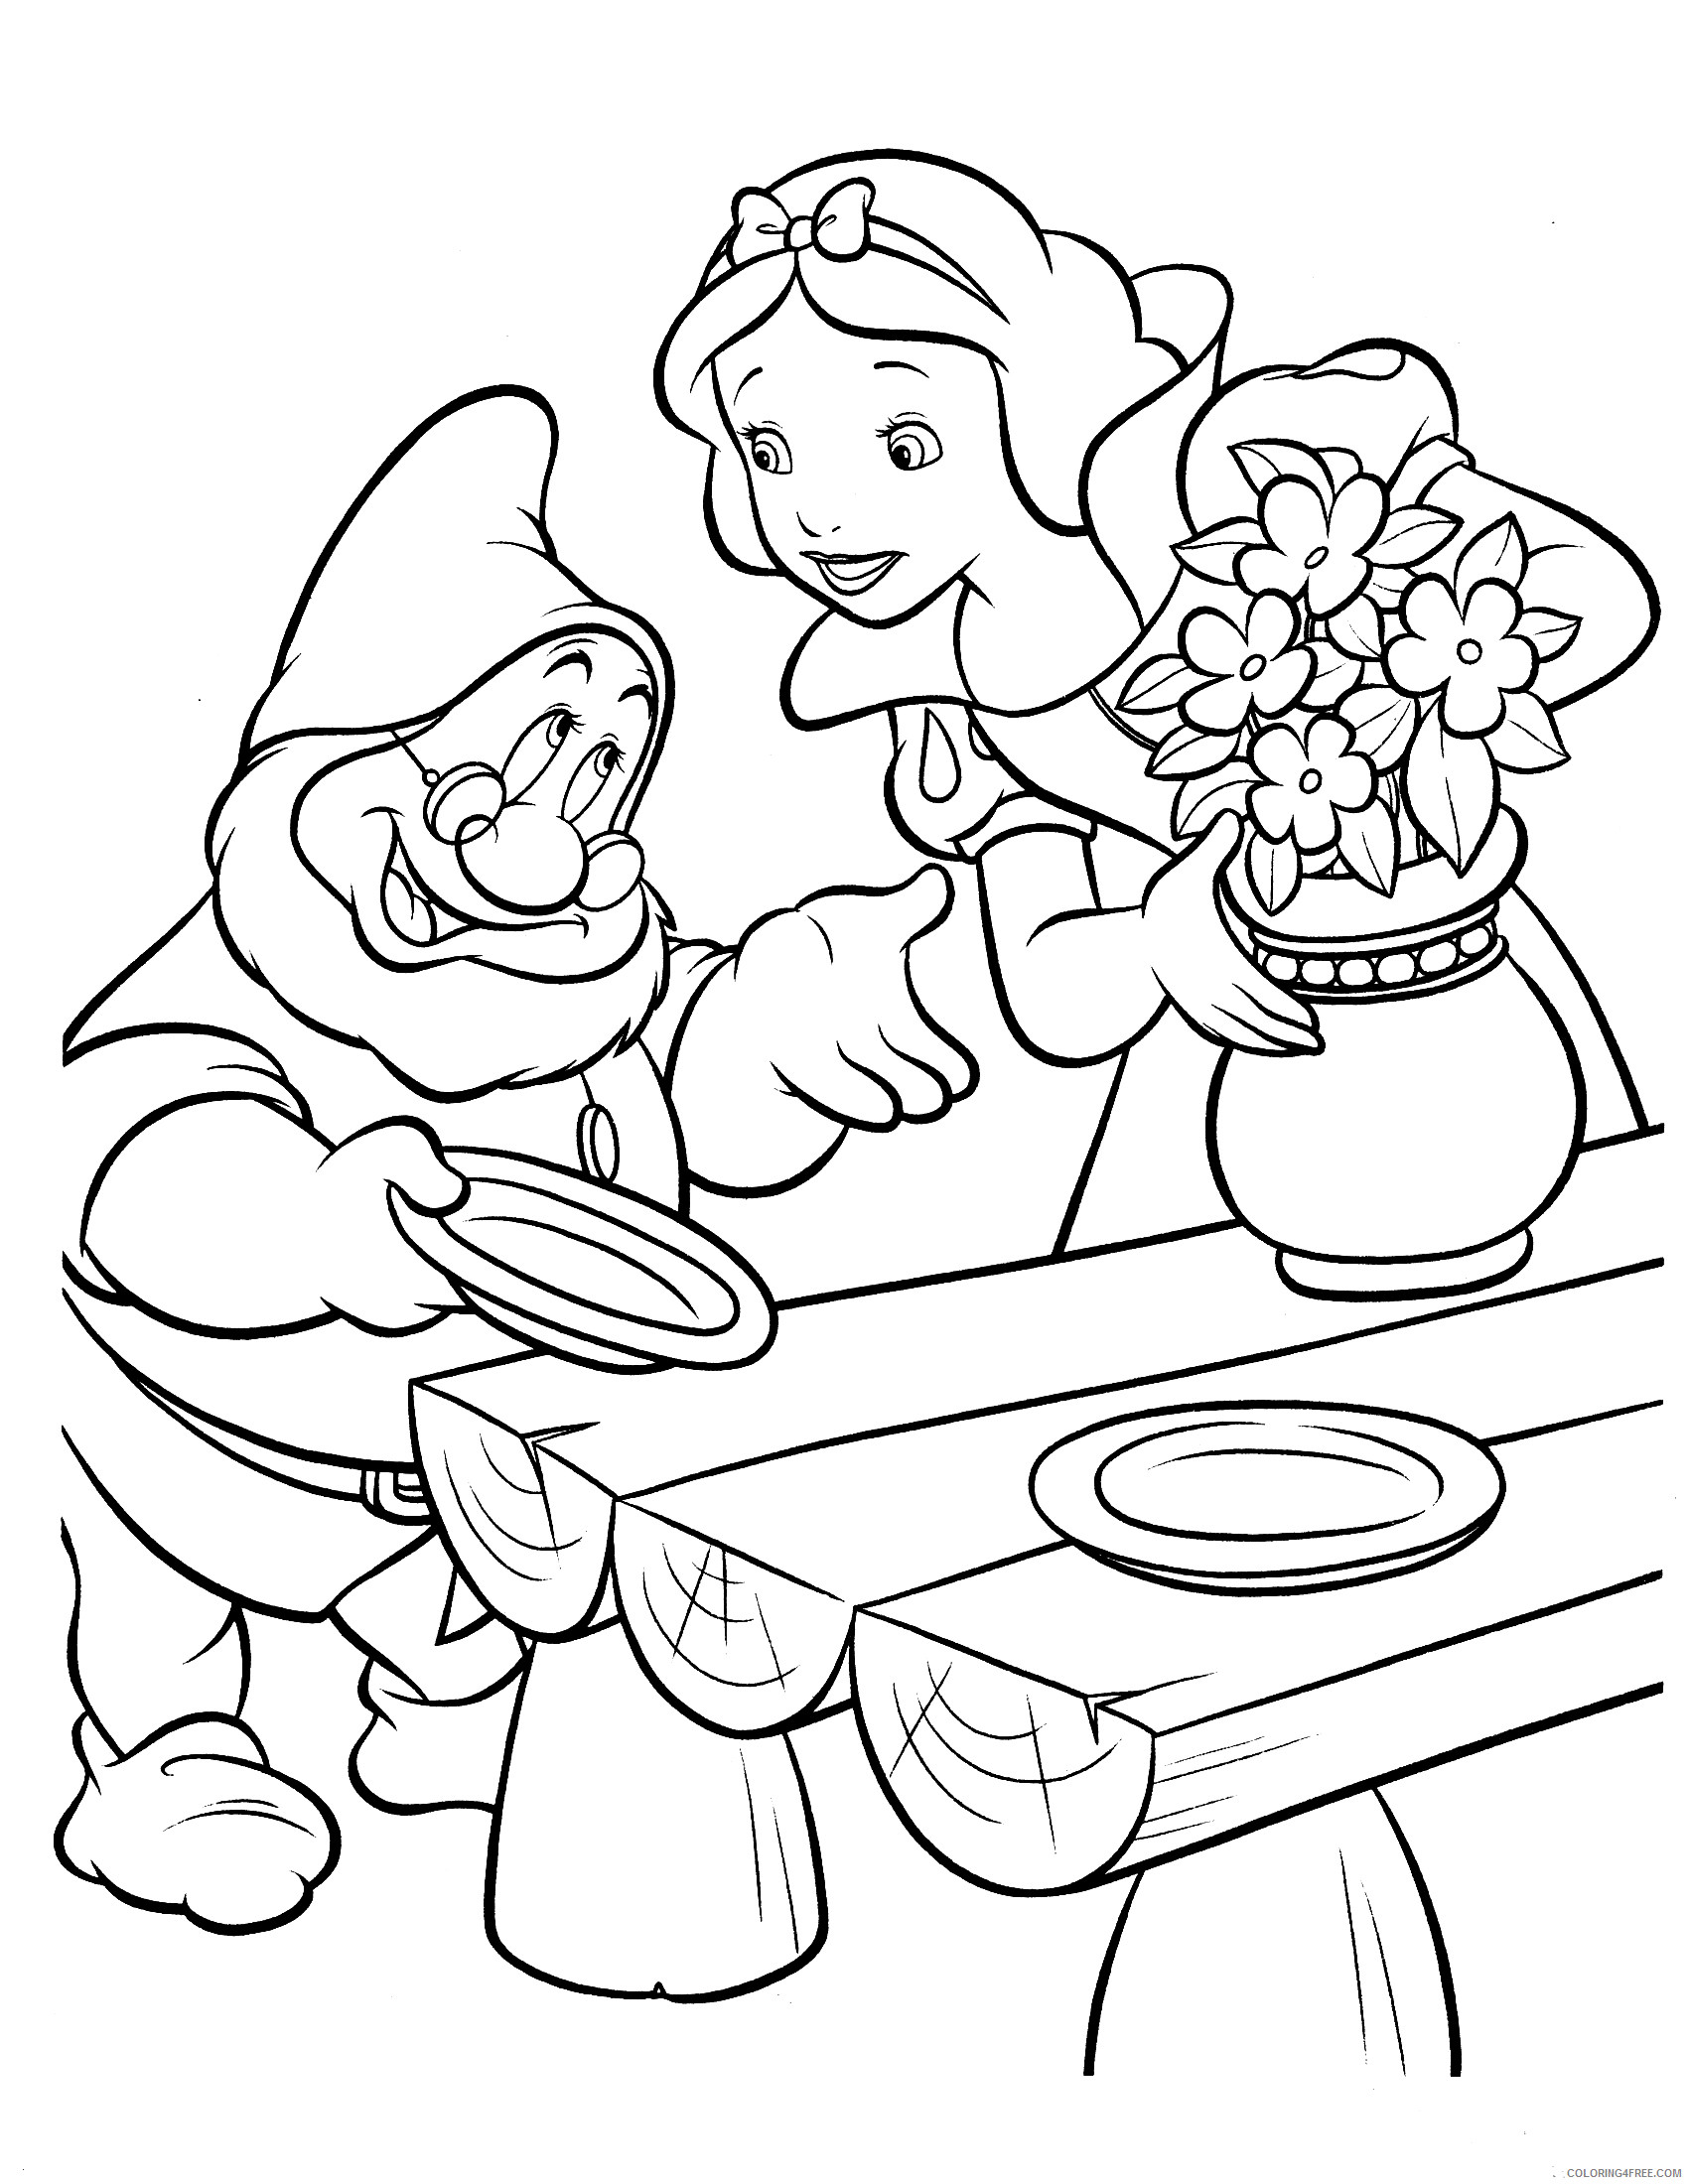 Snow White Coloring Pages Cartoons Free Snow White 2 Printable 2020 5710 Coloring4free